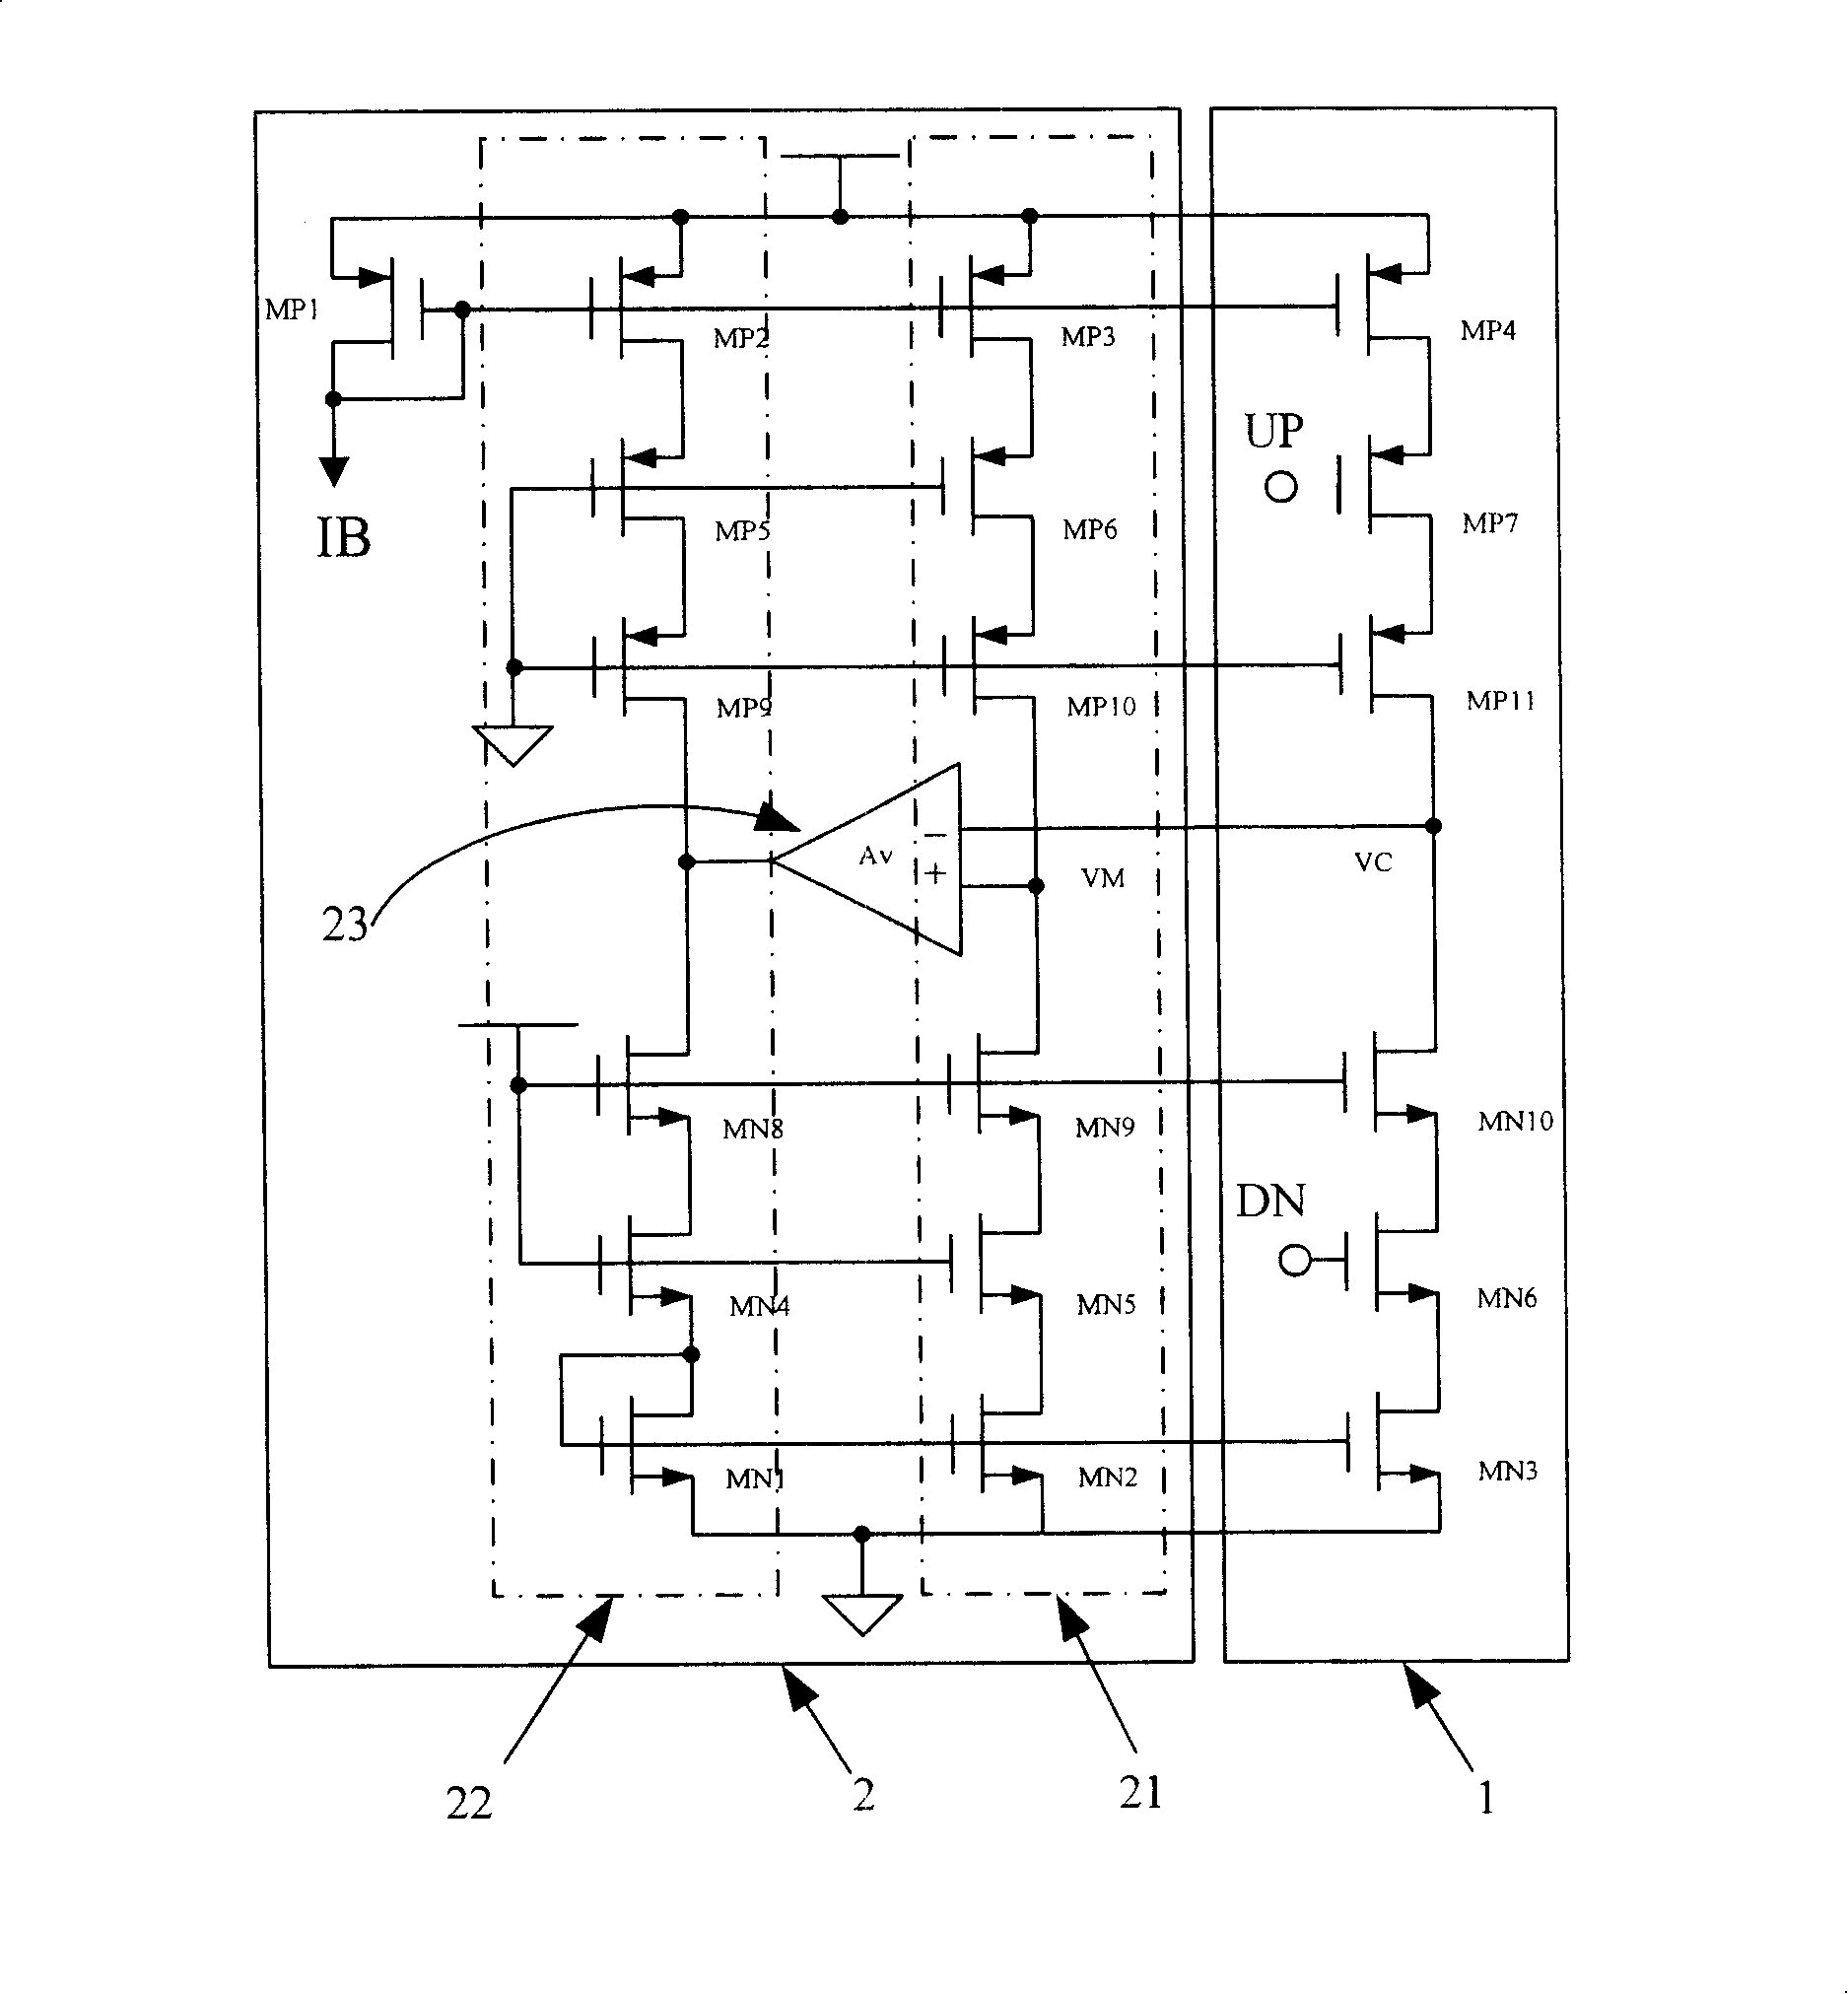 Self-calibration charge pump circuit used for phase-locked loop and its self-calibration feedback loop